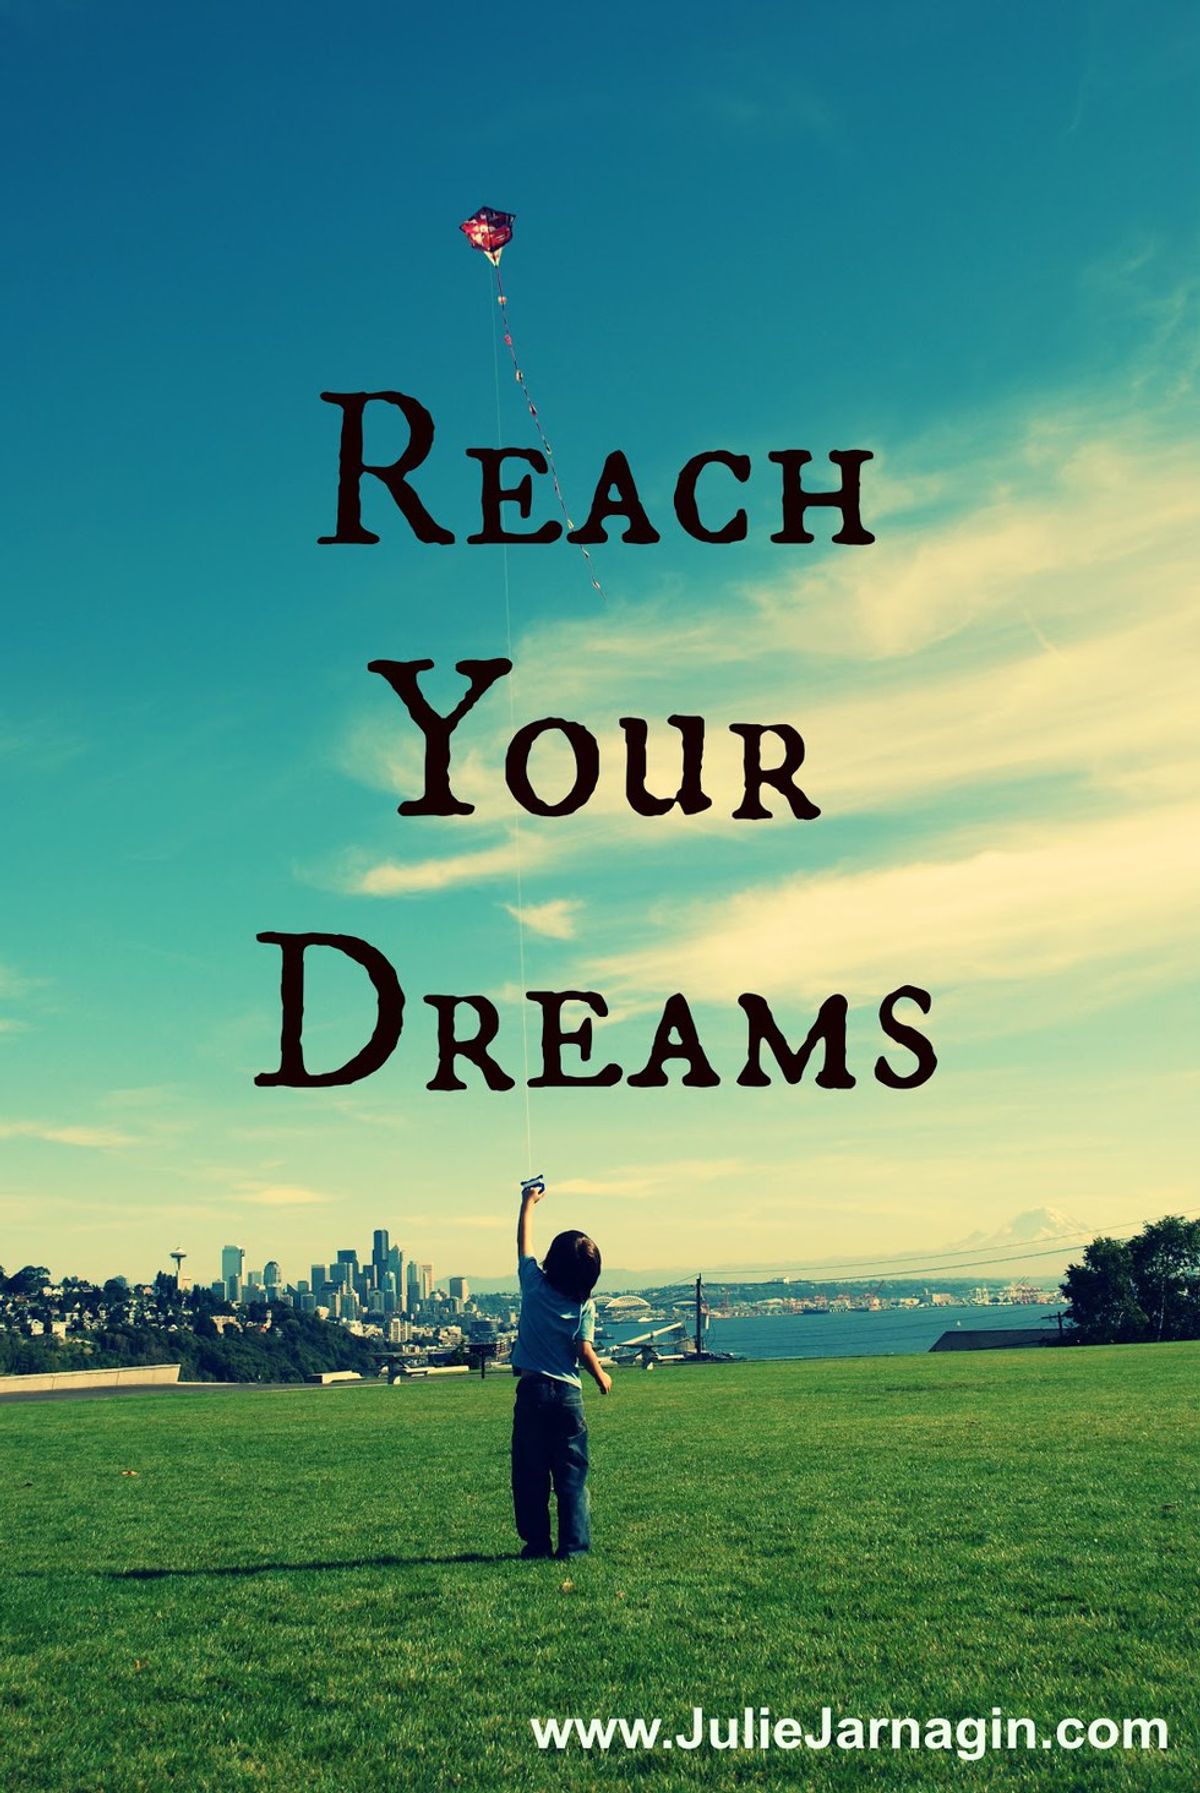 You can reach Your Dreams